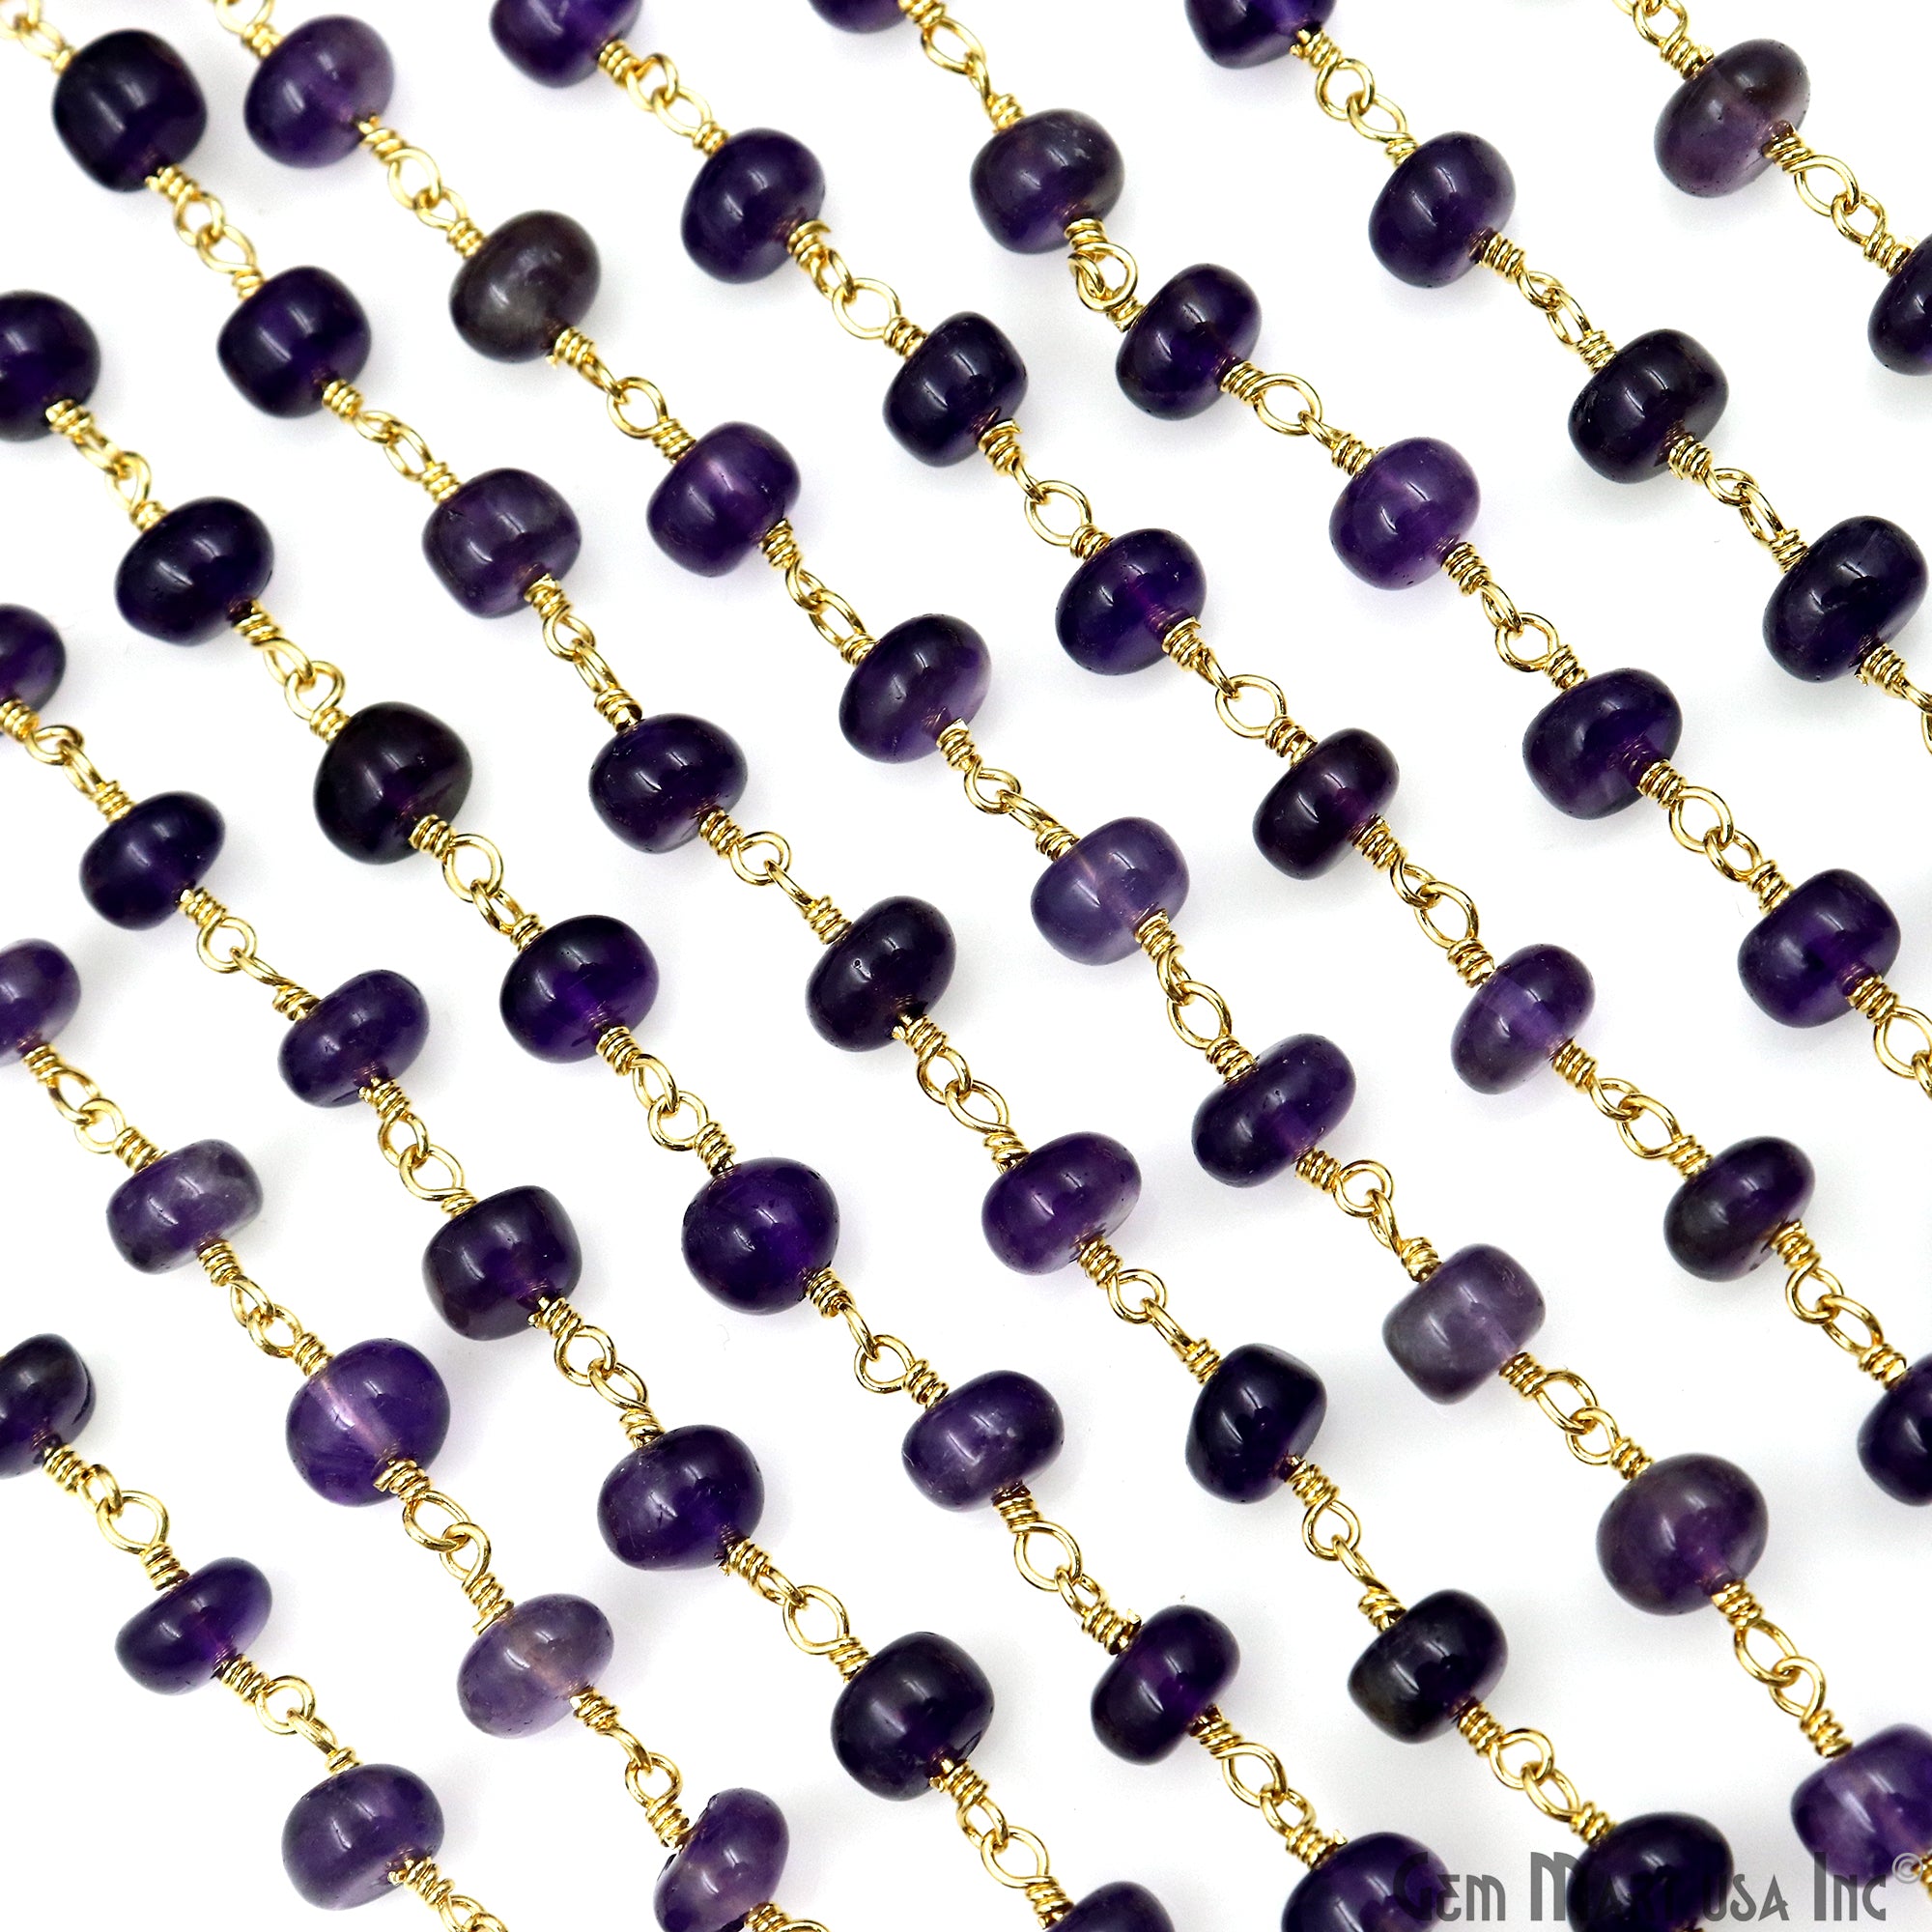 Amethyst Cabochon 5mm Faceted Beads Gold Wire Wrapped Beads Rosary Chain